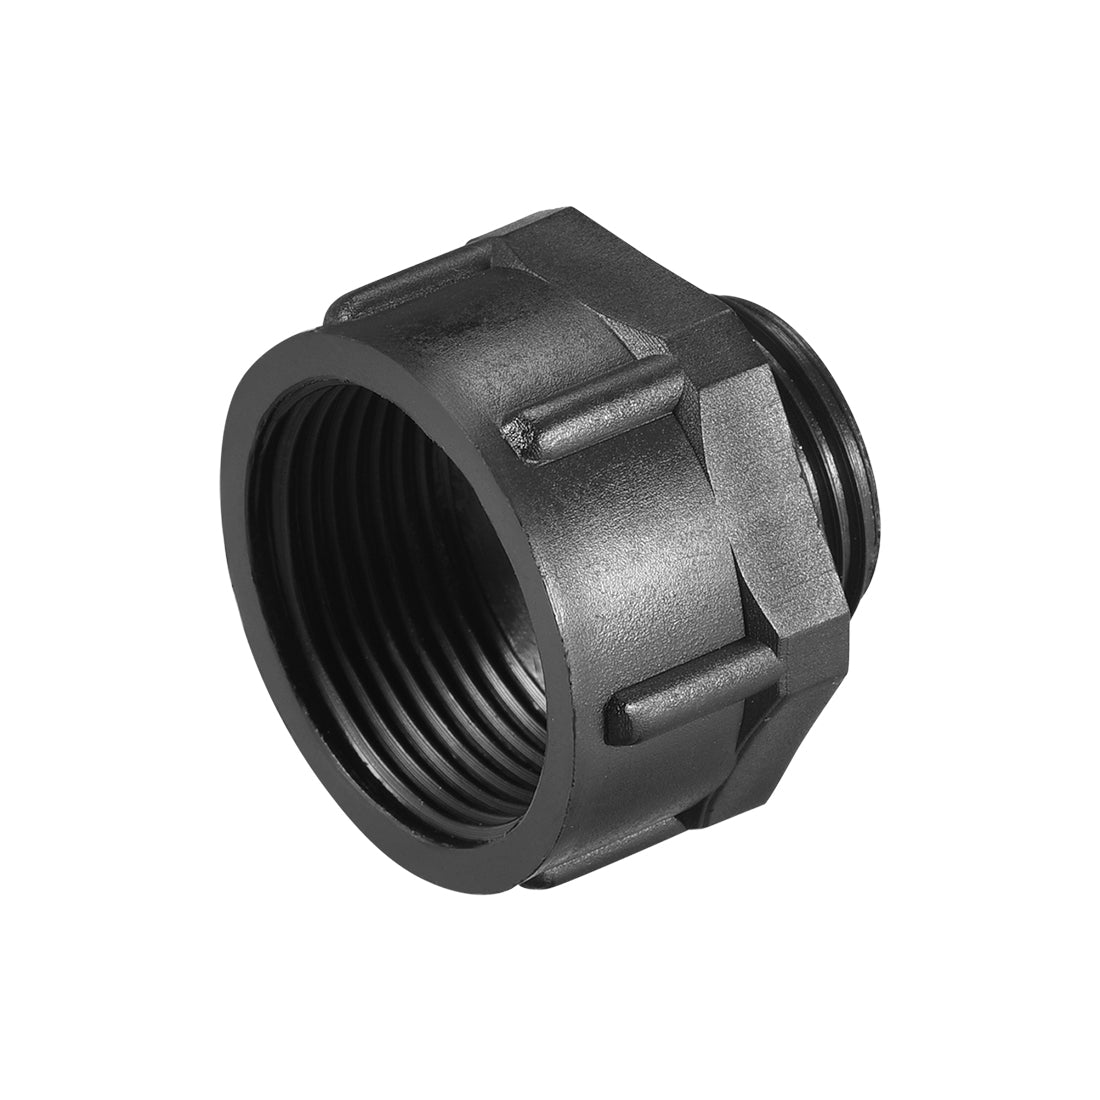 Uxcell Uxcell Threaded Bushings Nylon Connector Adaptor M20 Outer Thread to M25 Inner Thread Black